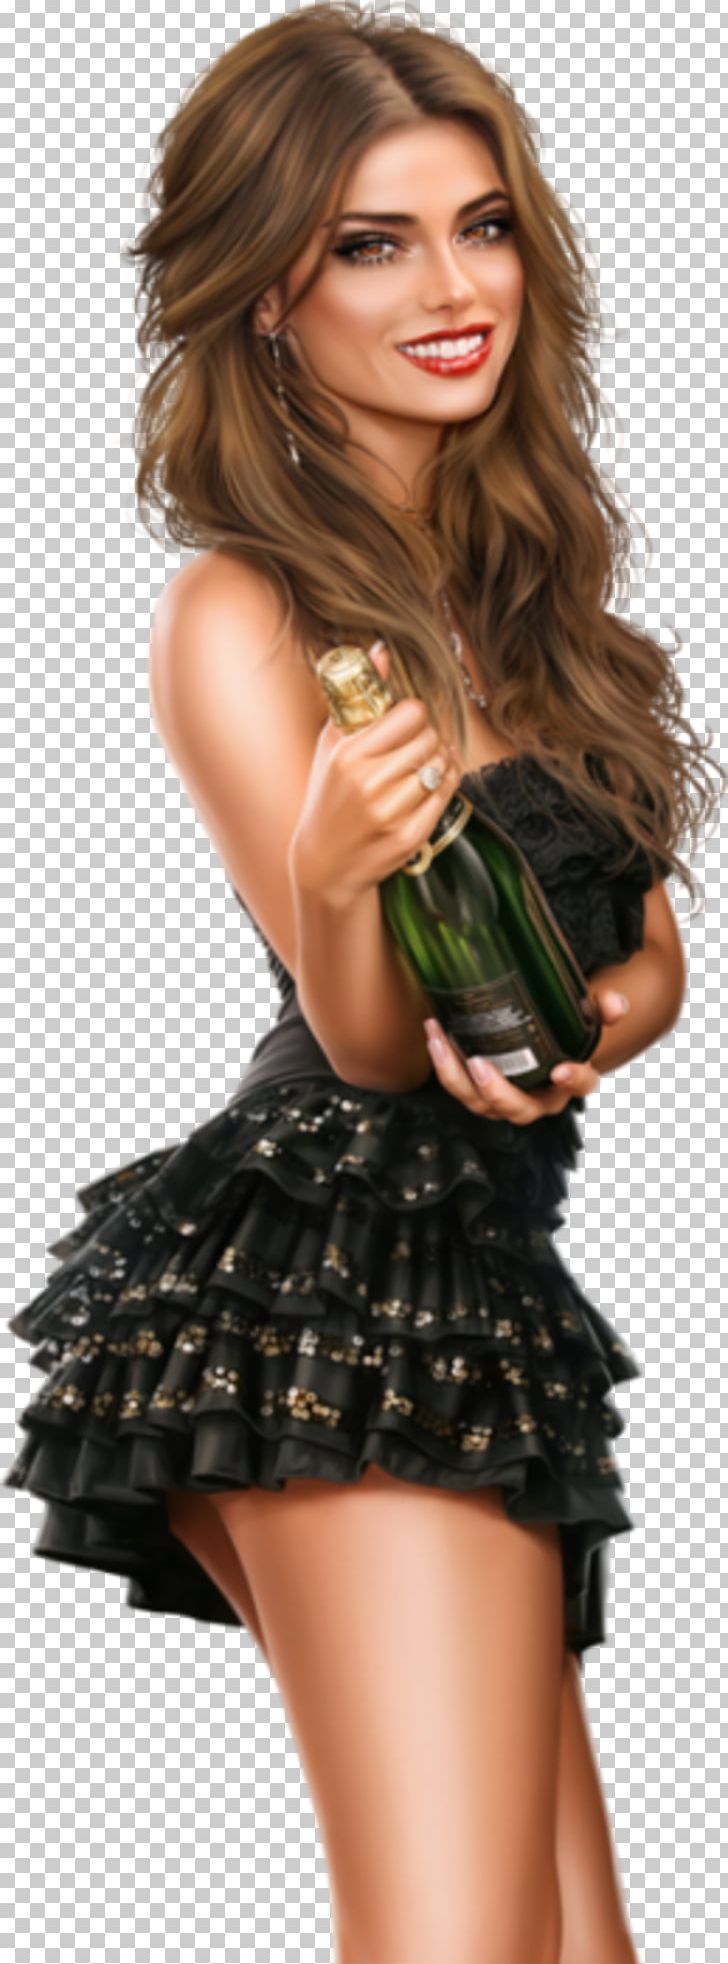 Woman Fashion Christmas Day Champagne Portable Network Graphics PNG, Clipart, Brown Hair, Champagne, Christmas Day, Costume, Dress Free PNG Download